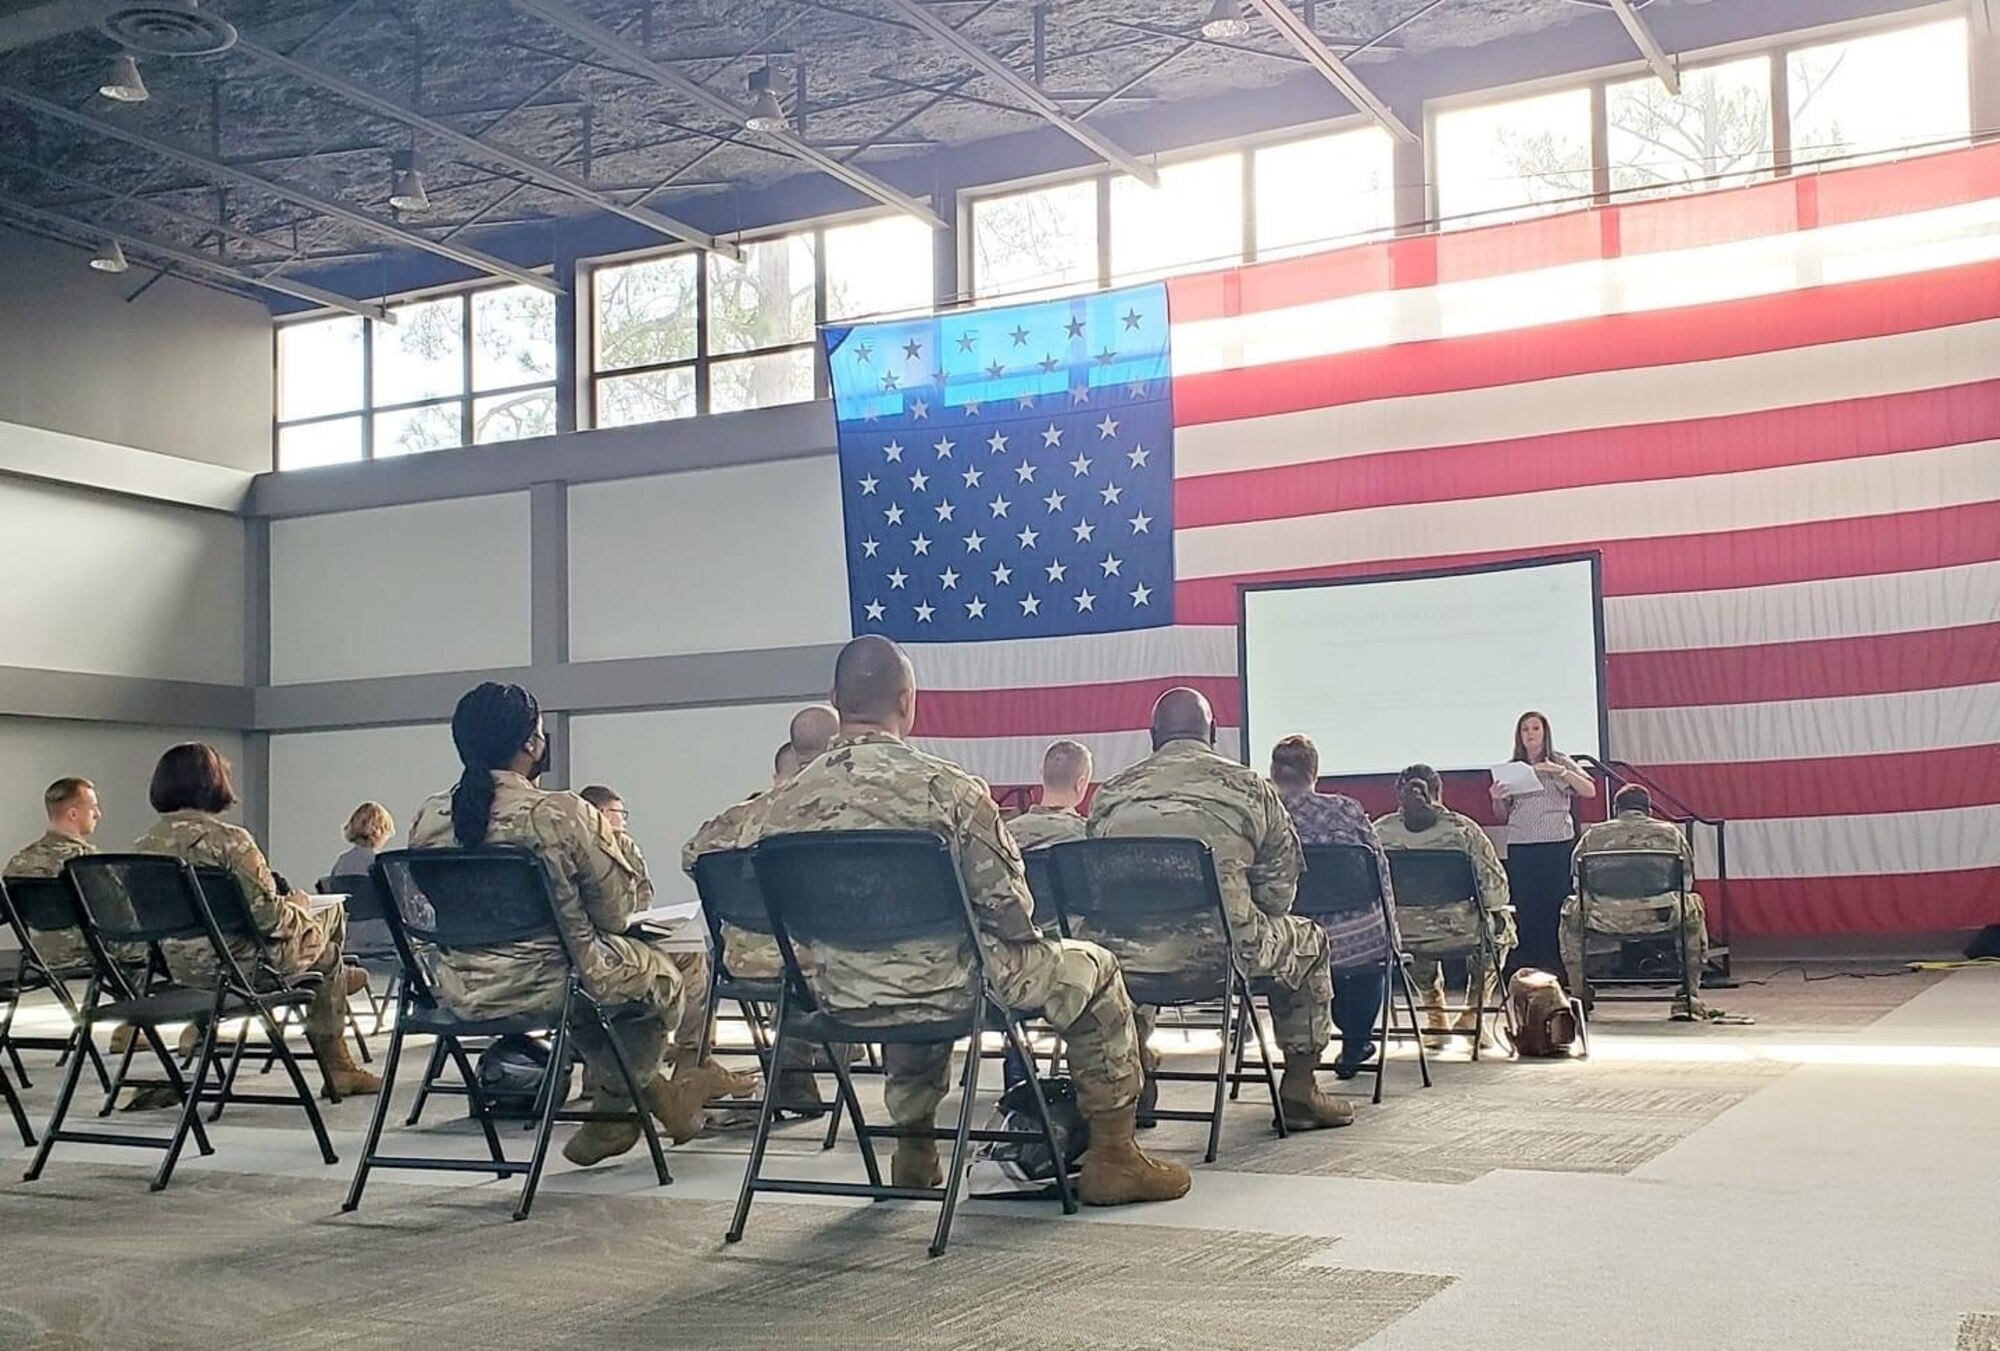 people sitting in a room with an American flag